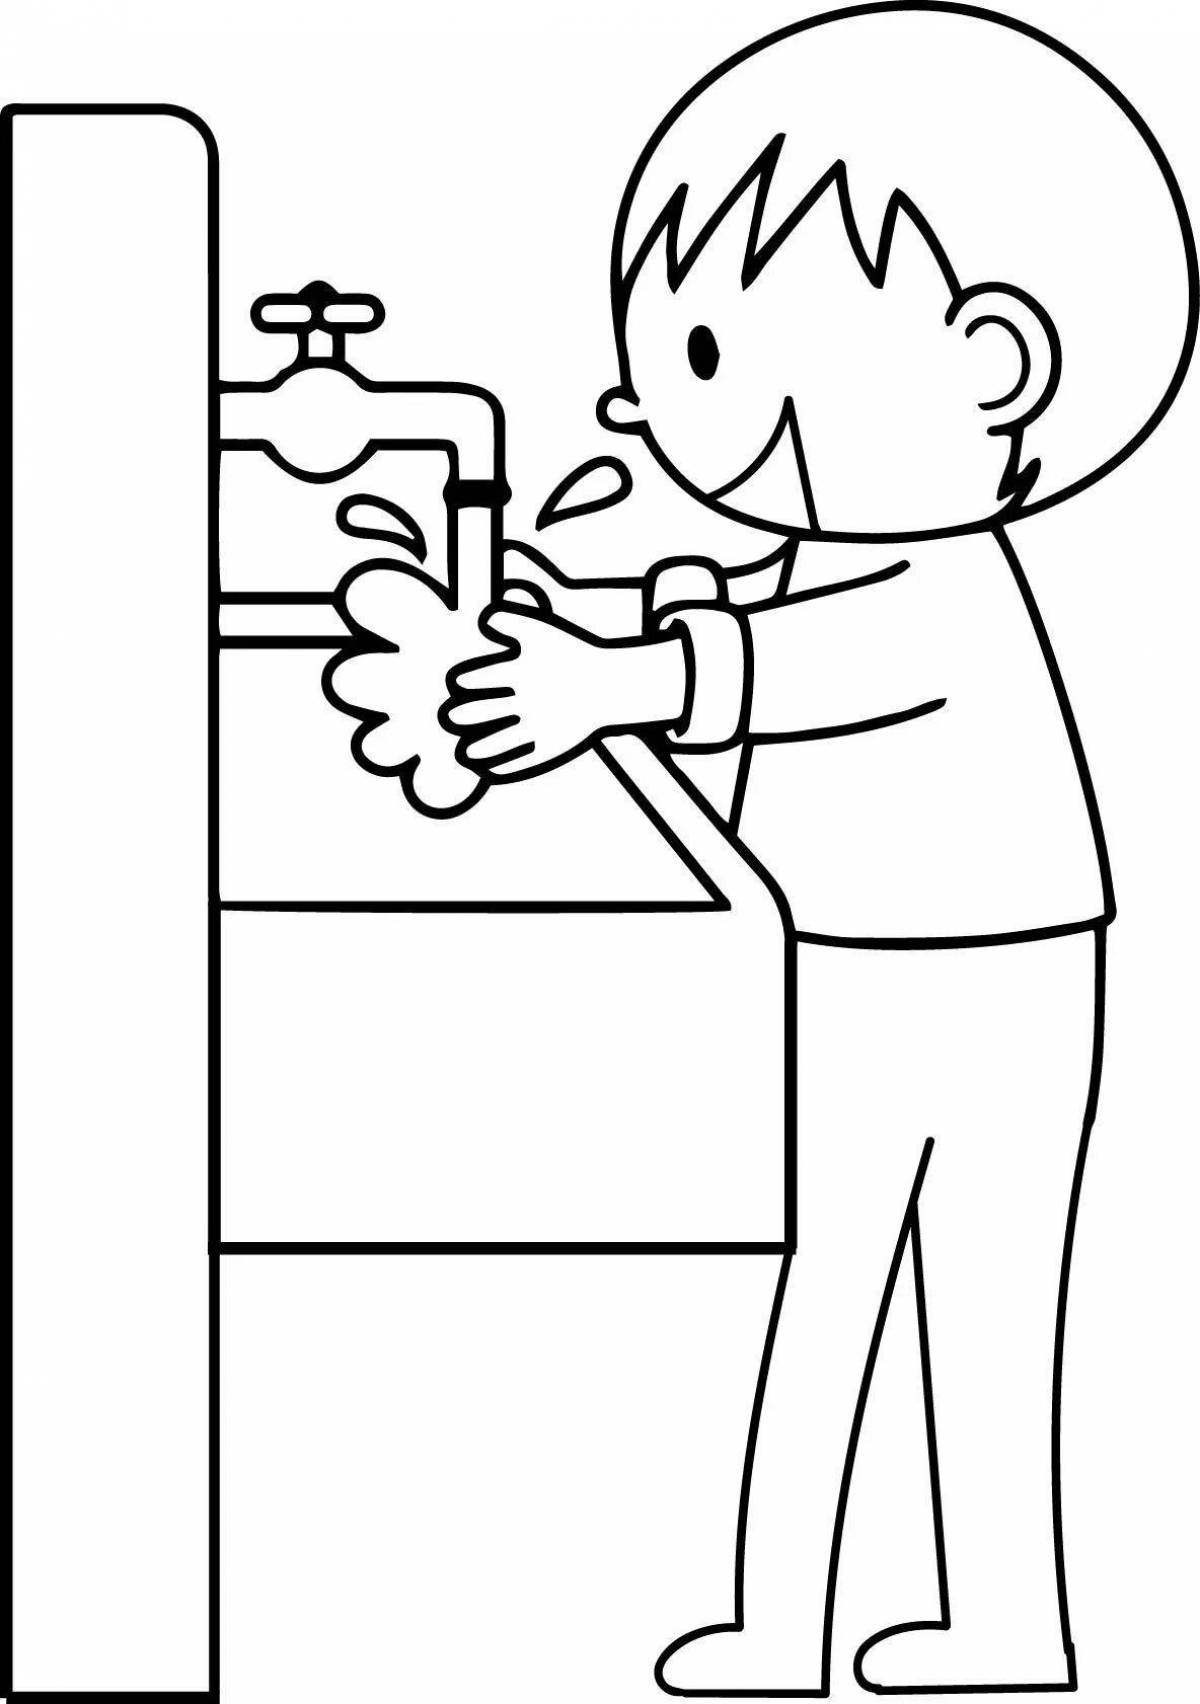 Playful hand washing coloring page